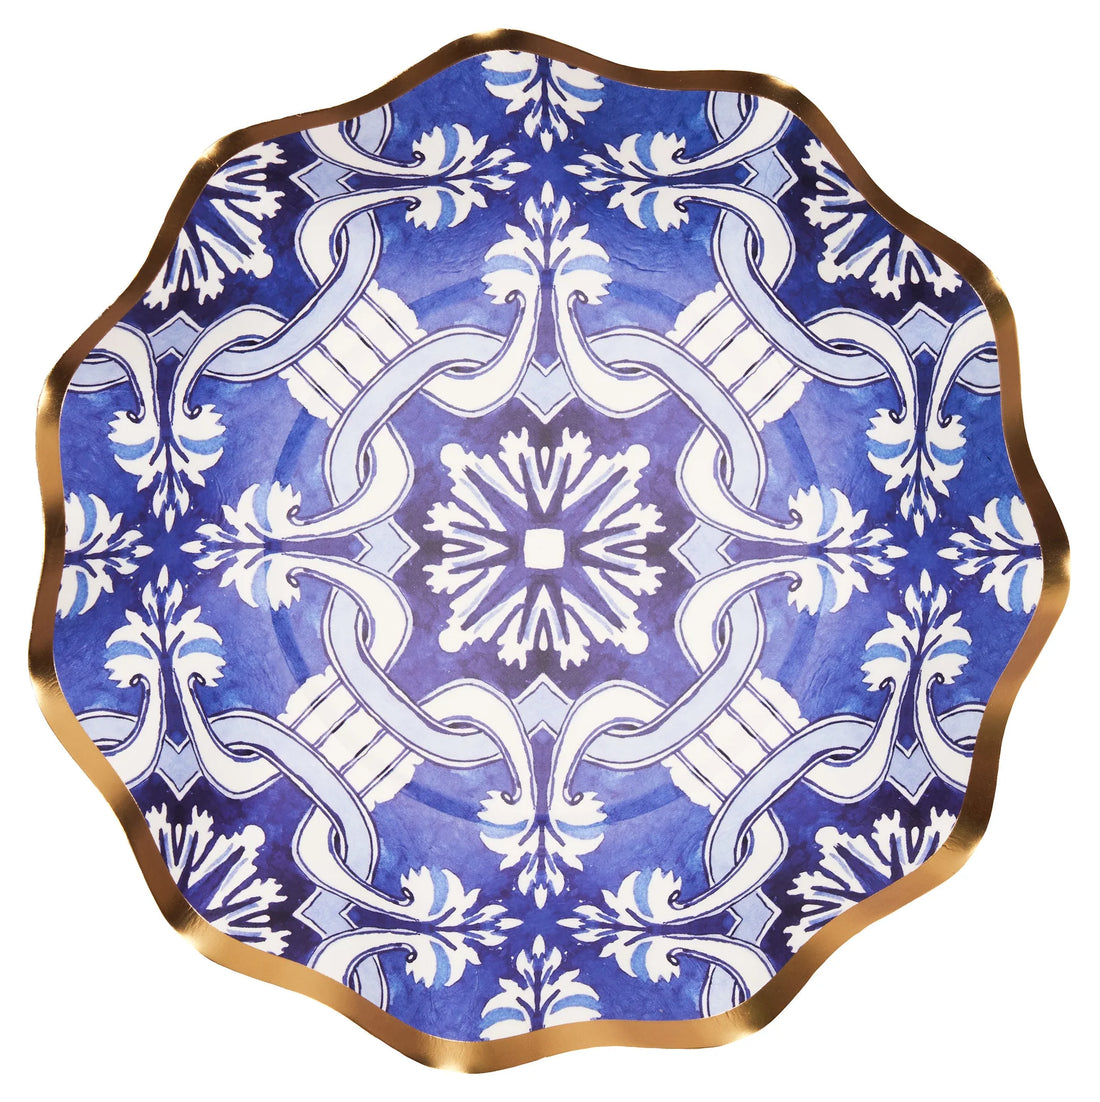 Moroccan Nights Paper Appetizer &amp; Dessert Bowl - 8 Per Package, featuring a blue and white plate with gold trim, inspired by Moroccan tile art. Elevate your event with elegance and style.